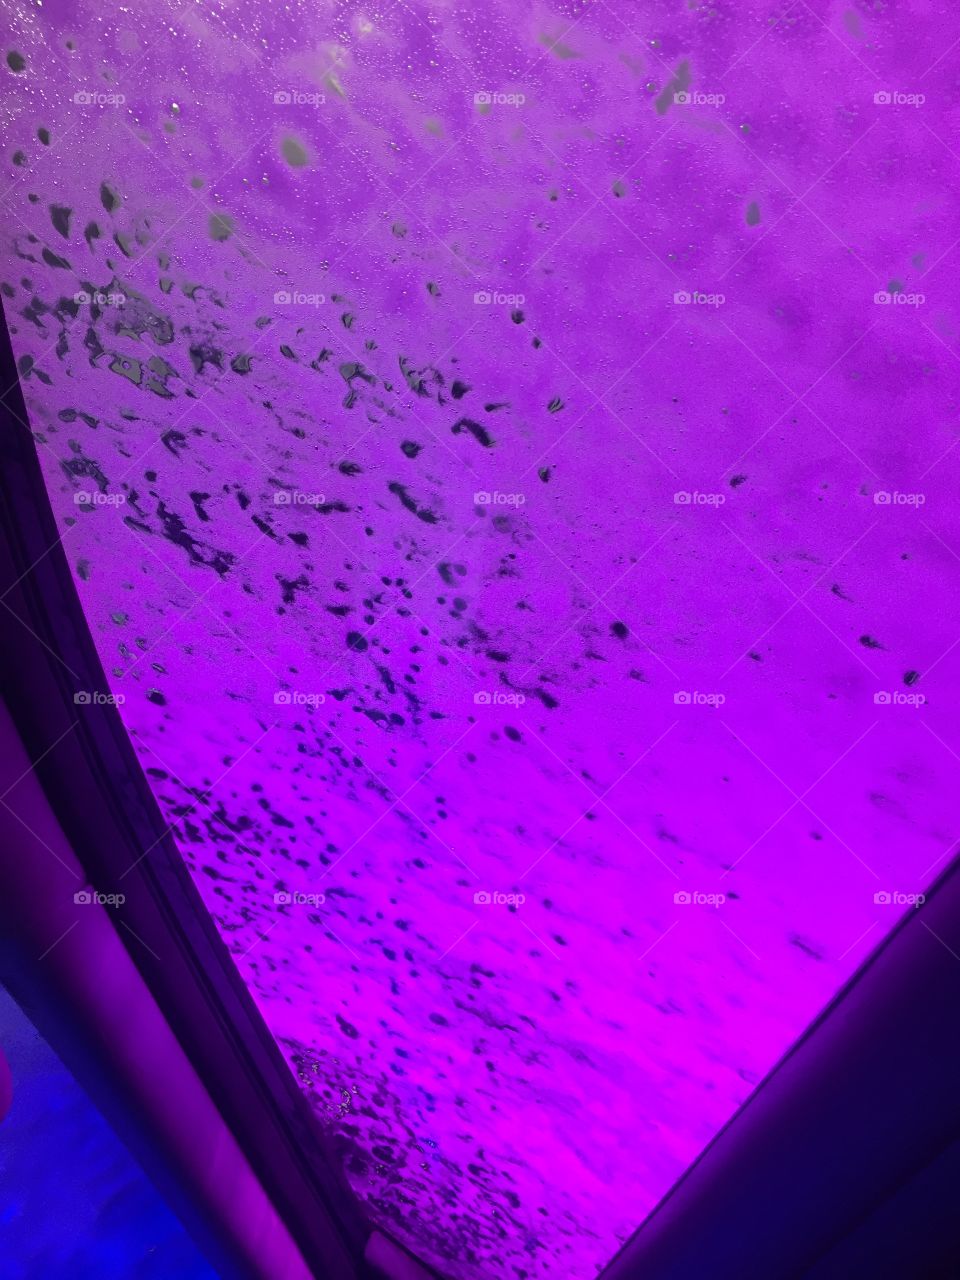 car washes can be beautiful too. 